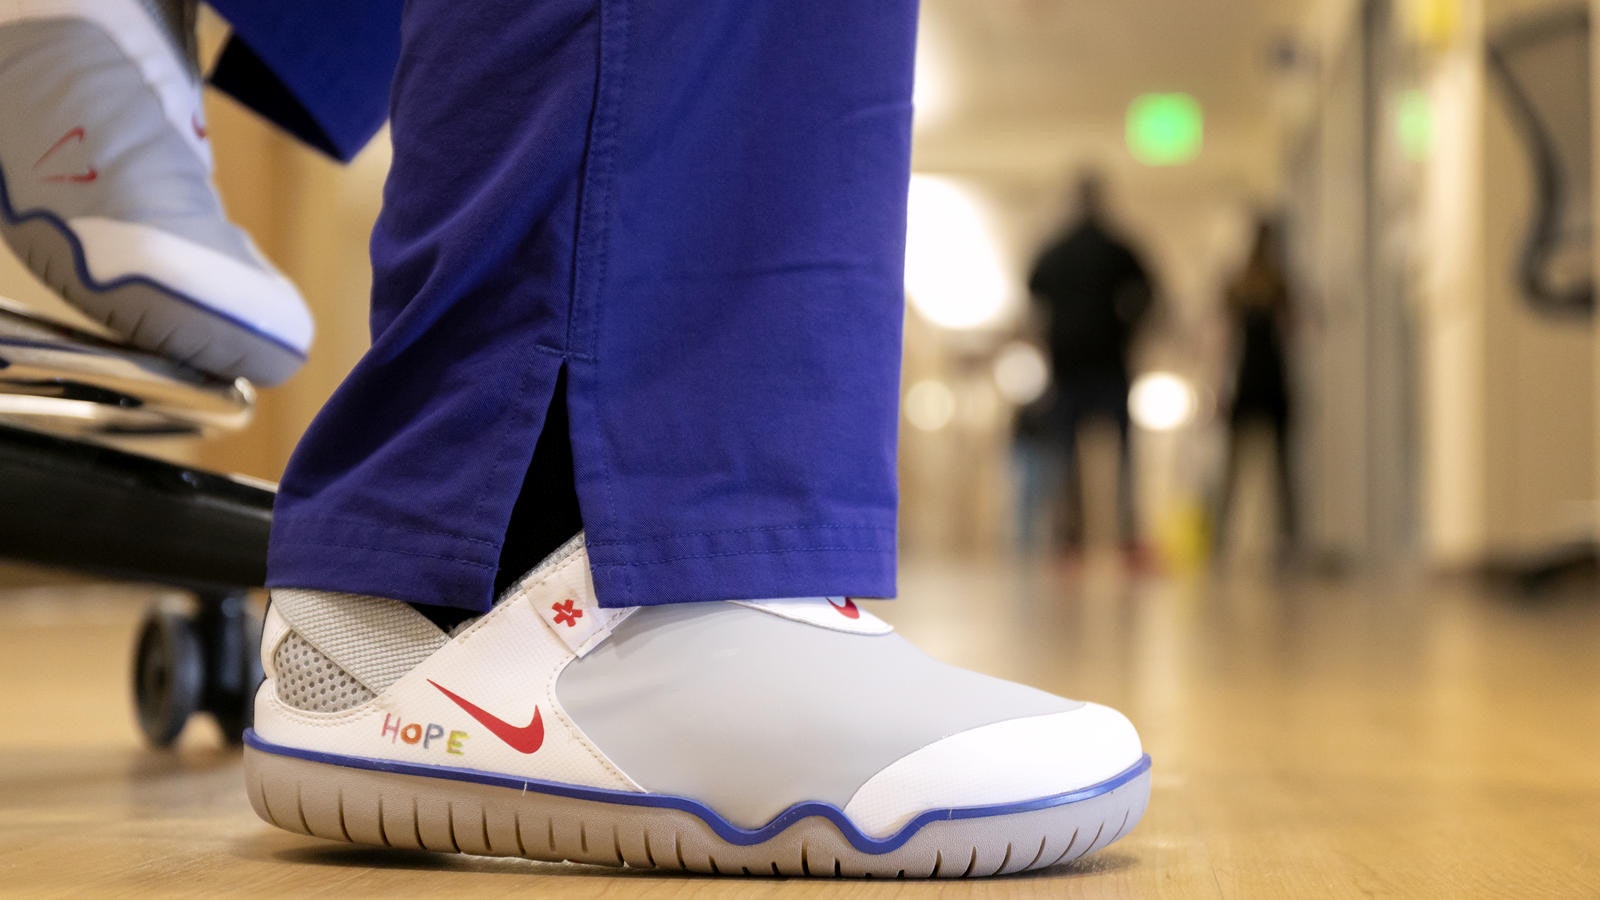 nike shoe giveaway for healthcare workers